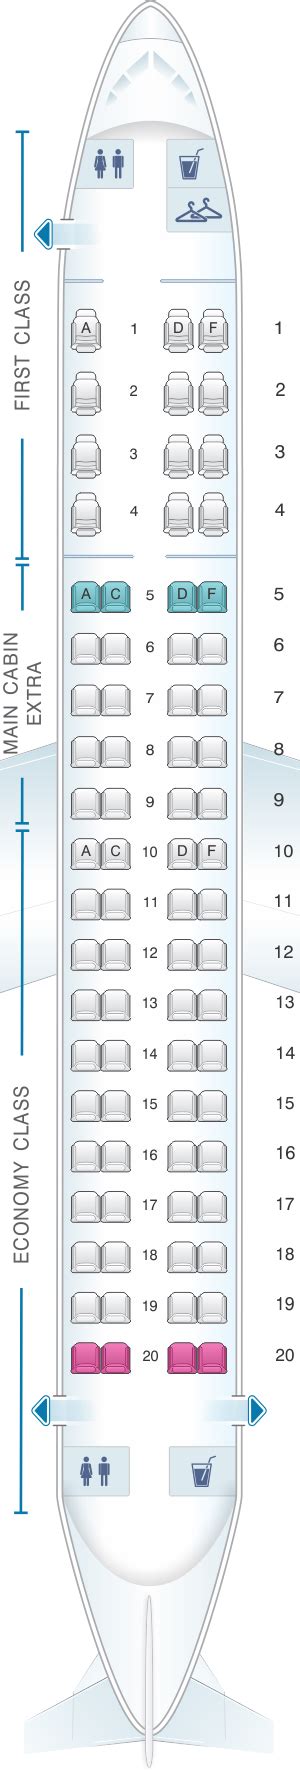 embraer erj 175 exit row seating chart